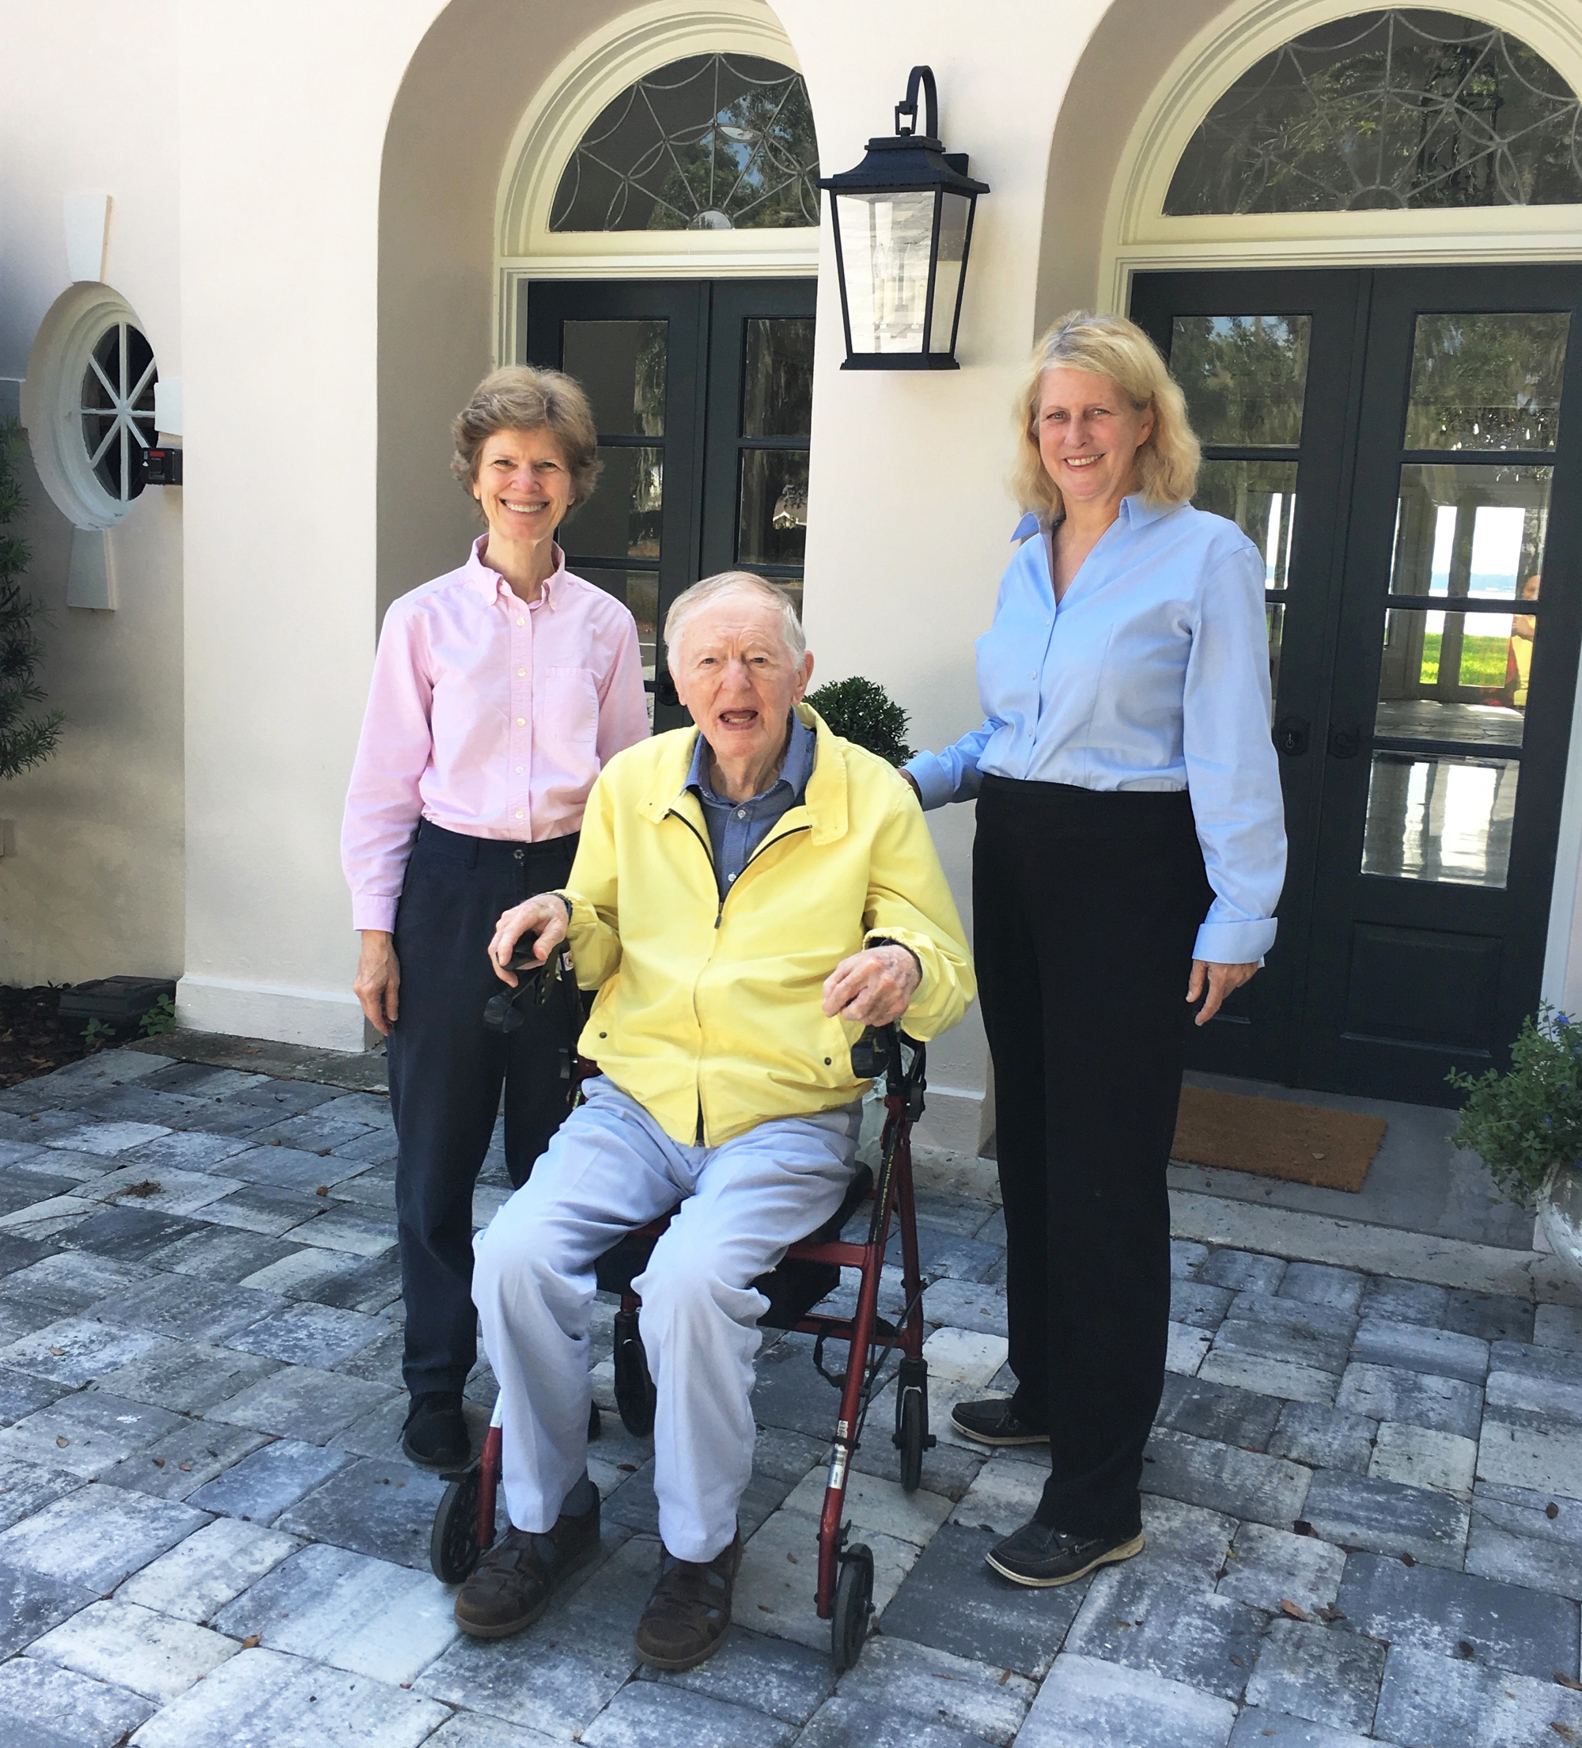 Marcy Mason Moody, her father, Raymond K. Mason, and Karrie Massee, who operates Azaleana Manor and The Club Continental during summer 2019. Massee bought Mason's Orange Park estate for conversion into a boutique hotel.